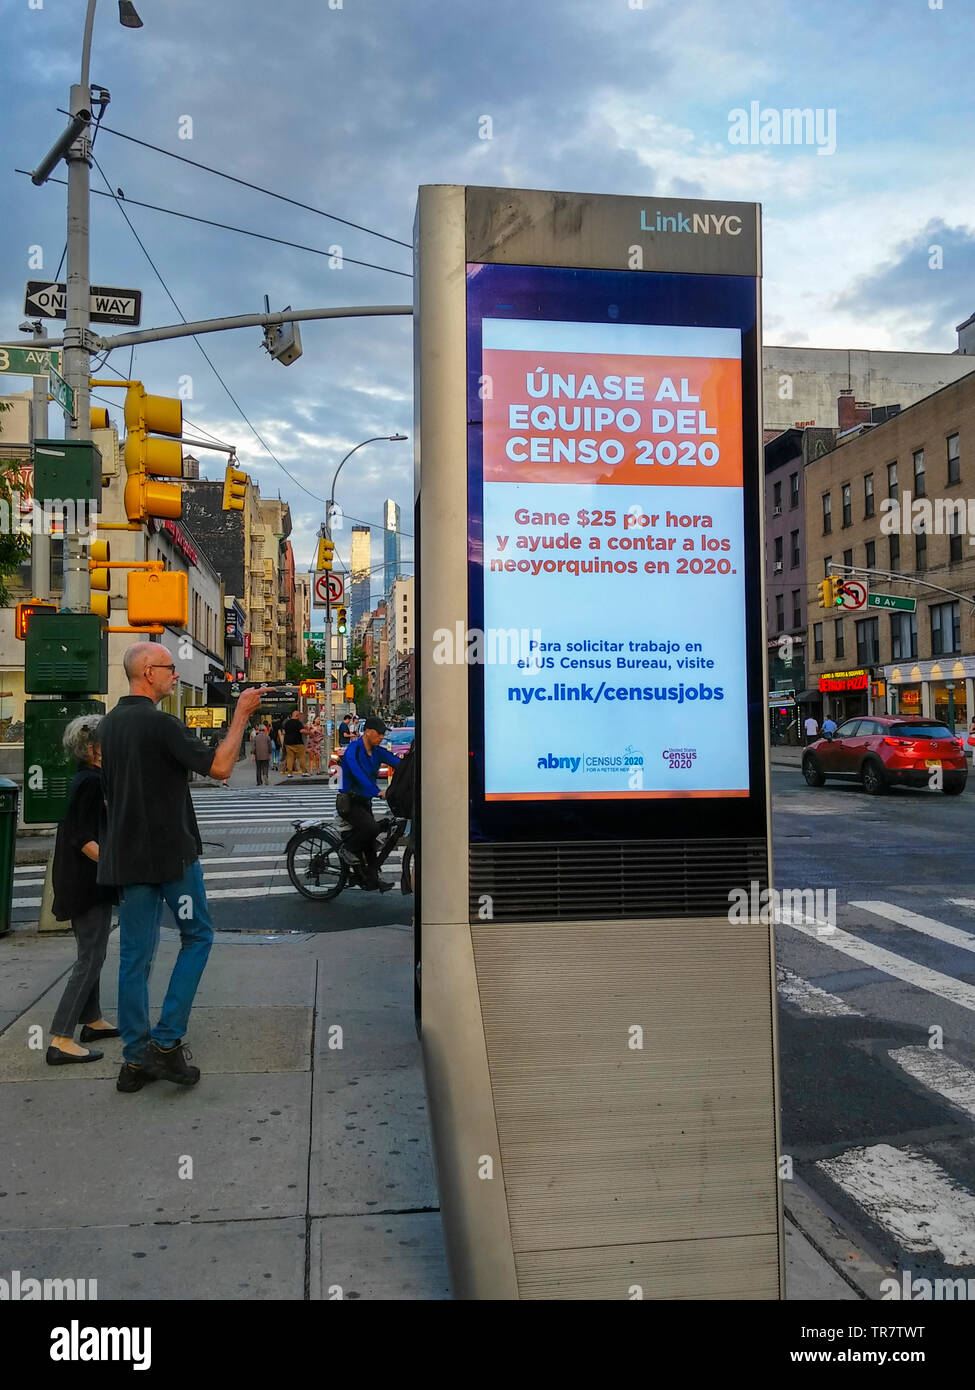 Advertising in Spanish on a LinkNYC kiosk in New York promotes census jobs, seen on Sunday, May 26, 2019. The census is a count of everyone living in the United States, citizens and non-citizens. By law it is conducted every 10 years and the information is used to reapportion congressional districts as well as affecting the distribution of government funds.  (© Richard B. Levine) Stock Photo